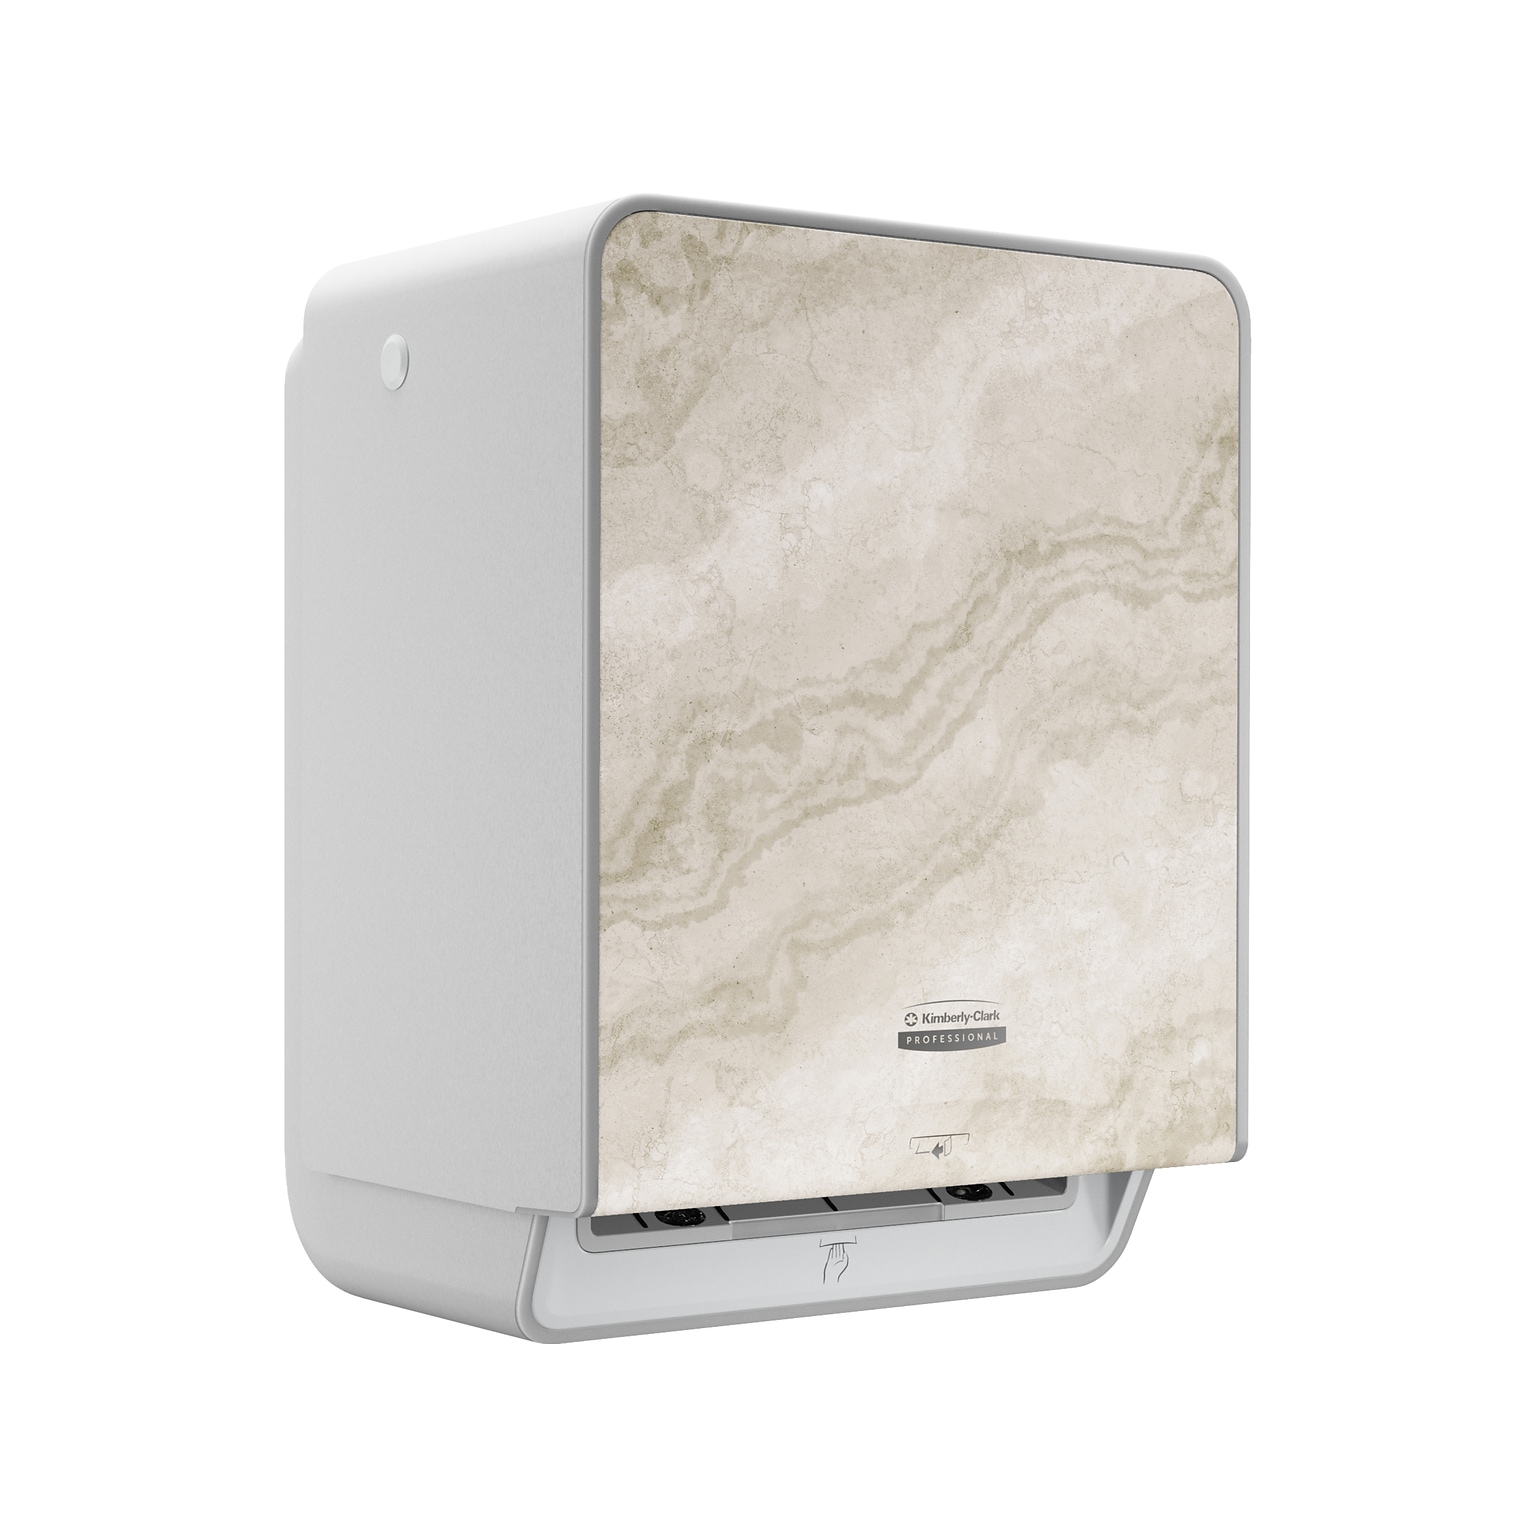 Kimberly-Clark Professional ICON Automatic Roll Towel Dispenser with Faceplate, Brushed Gray/Warm Marble (58740)